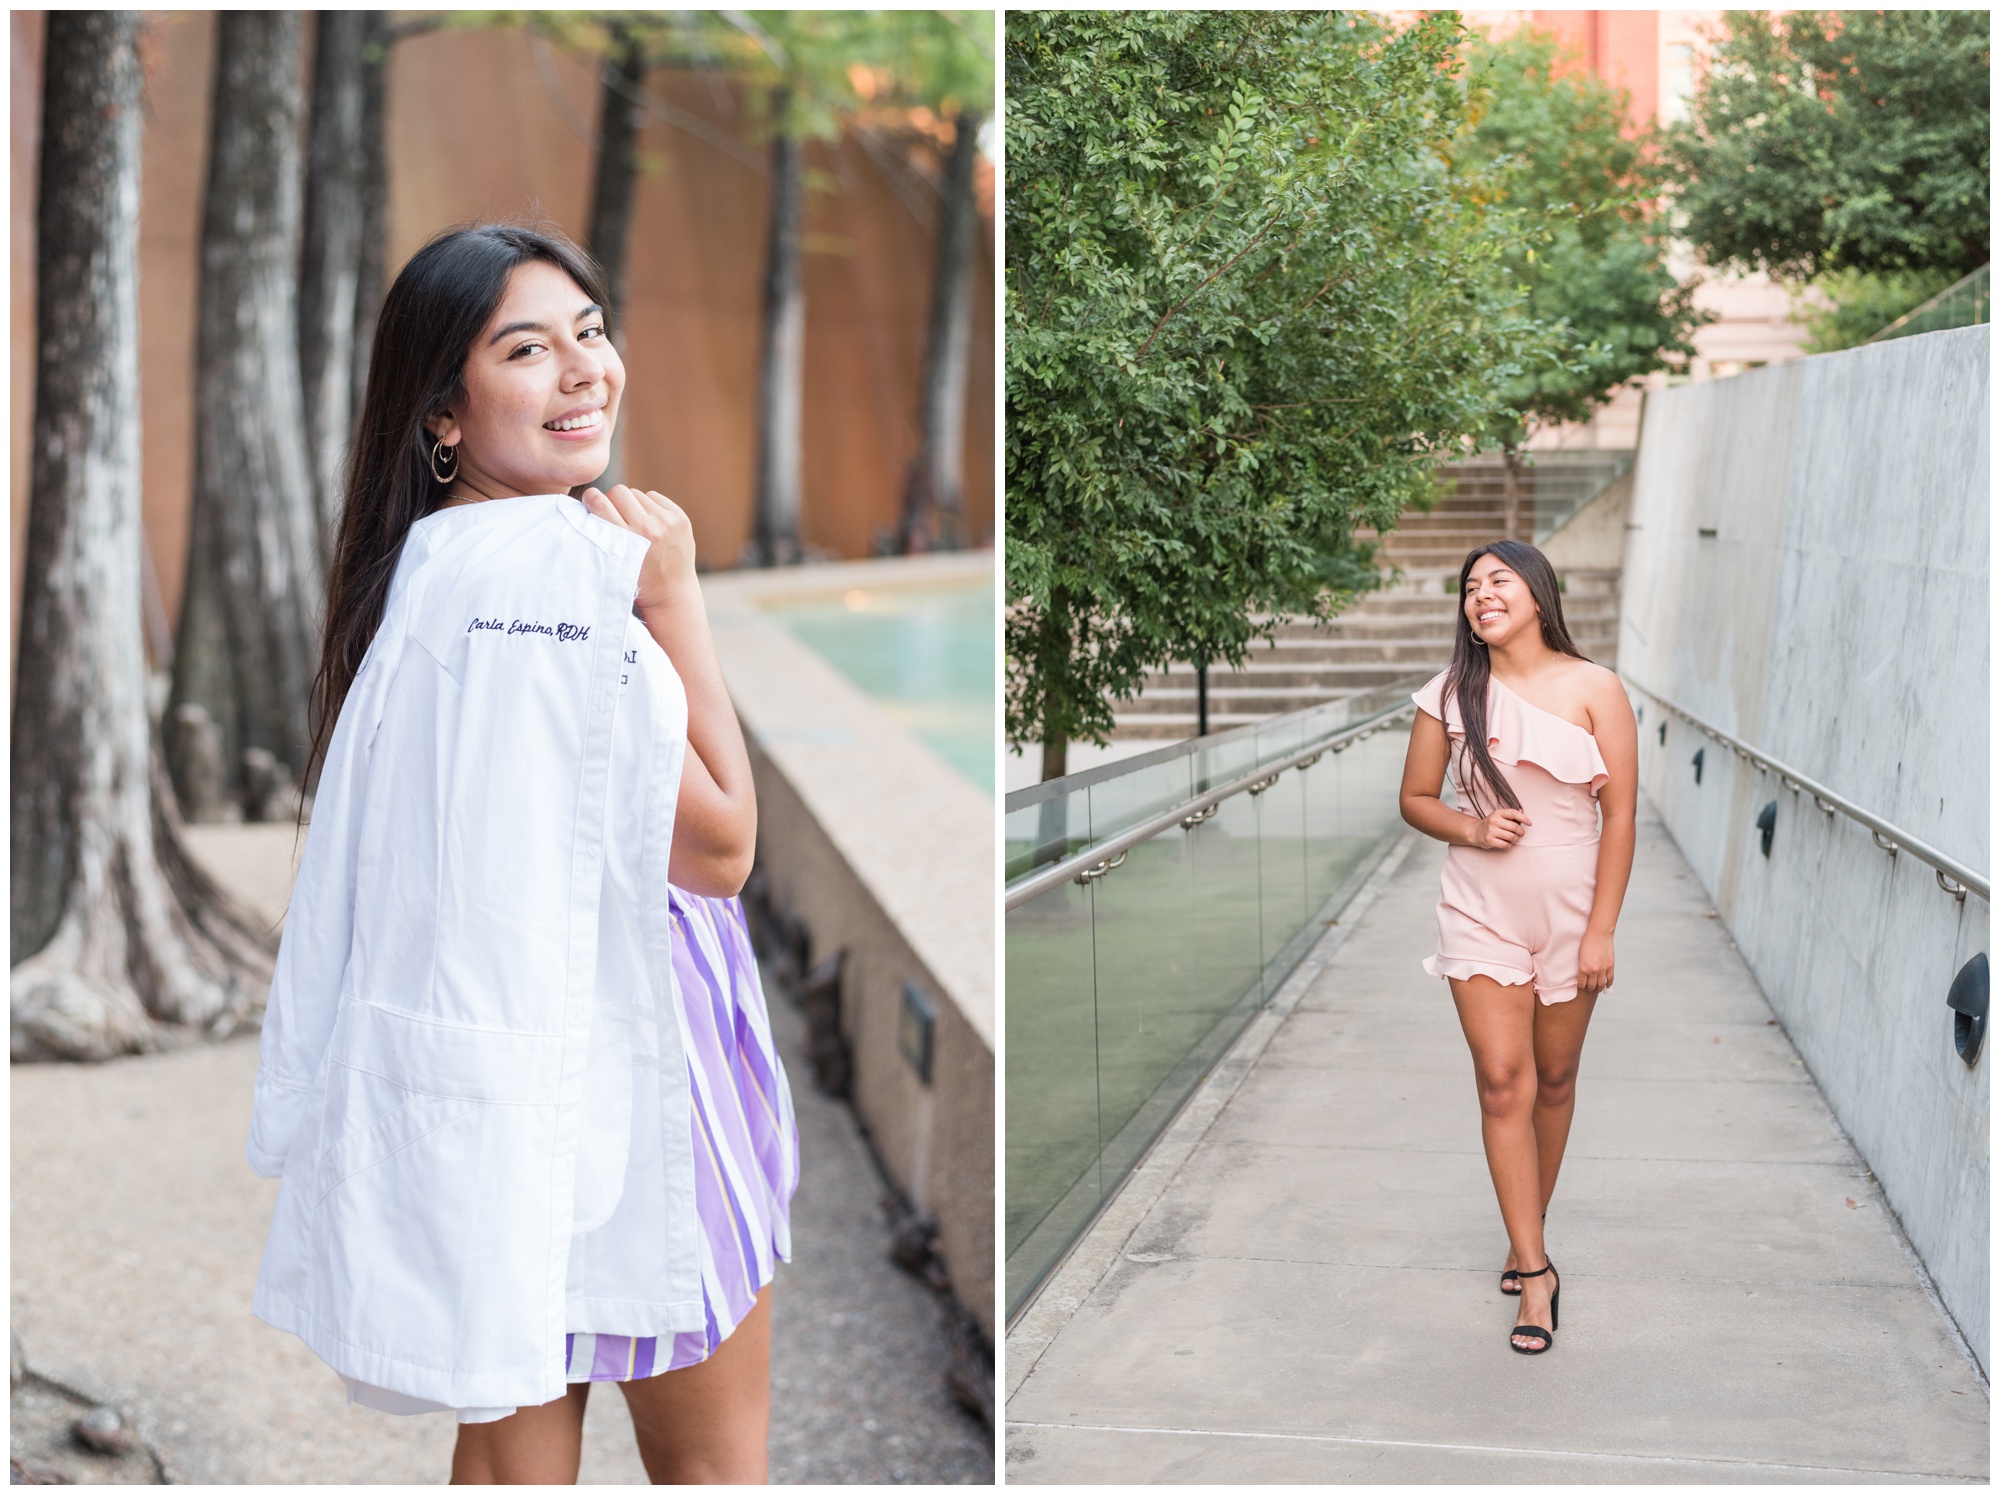 Downtown Fort Worth Senior Session | Downtown Fort Worth | Fort Worth Water Gardens | Fort Worth Senior Photographer | Lauren Grimes Photography